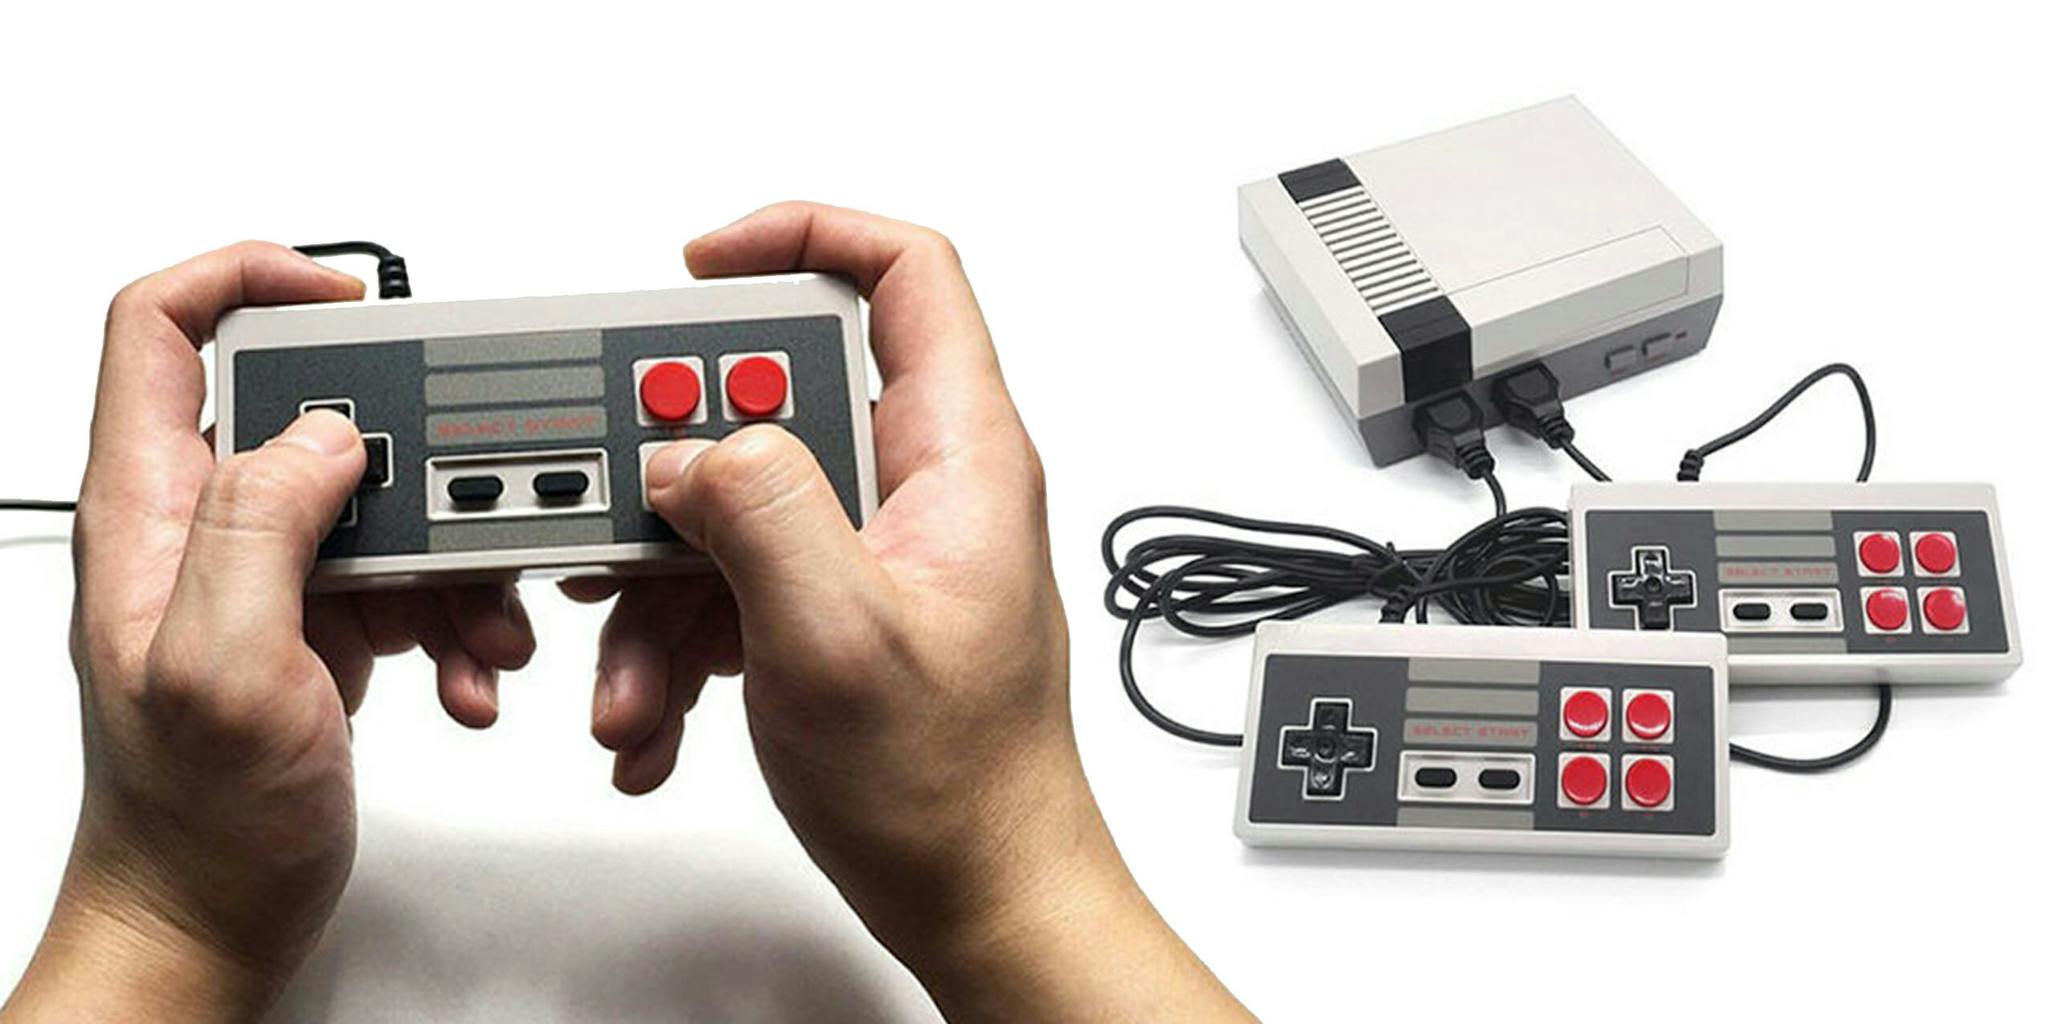 This retro gaming console is your childhood dream come true